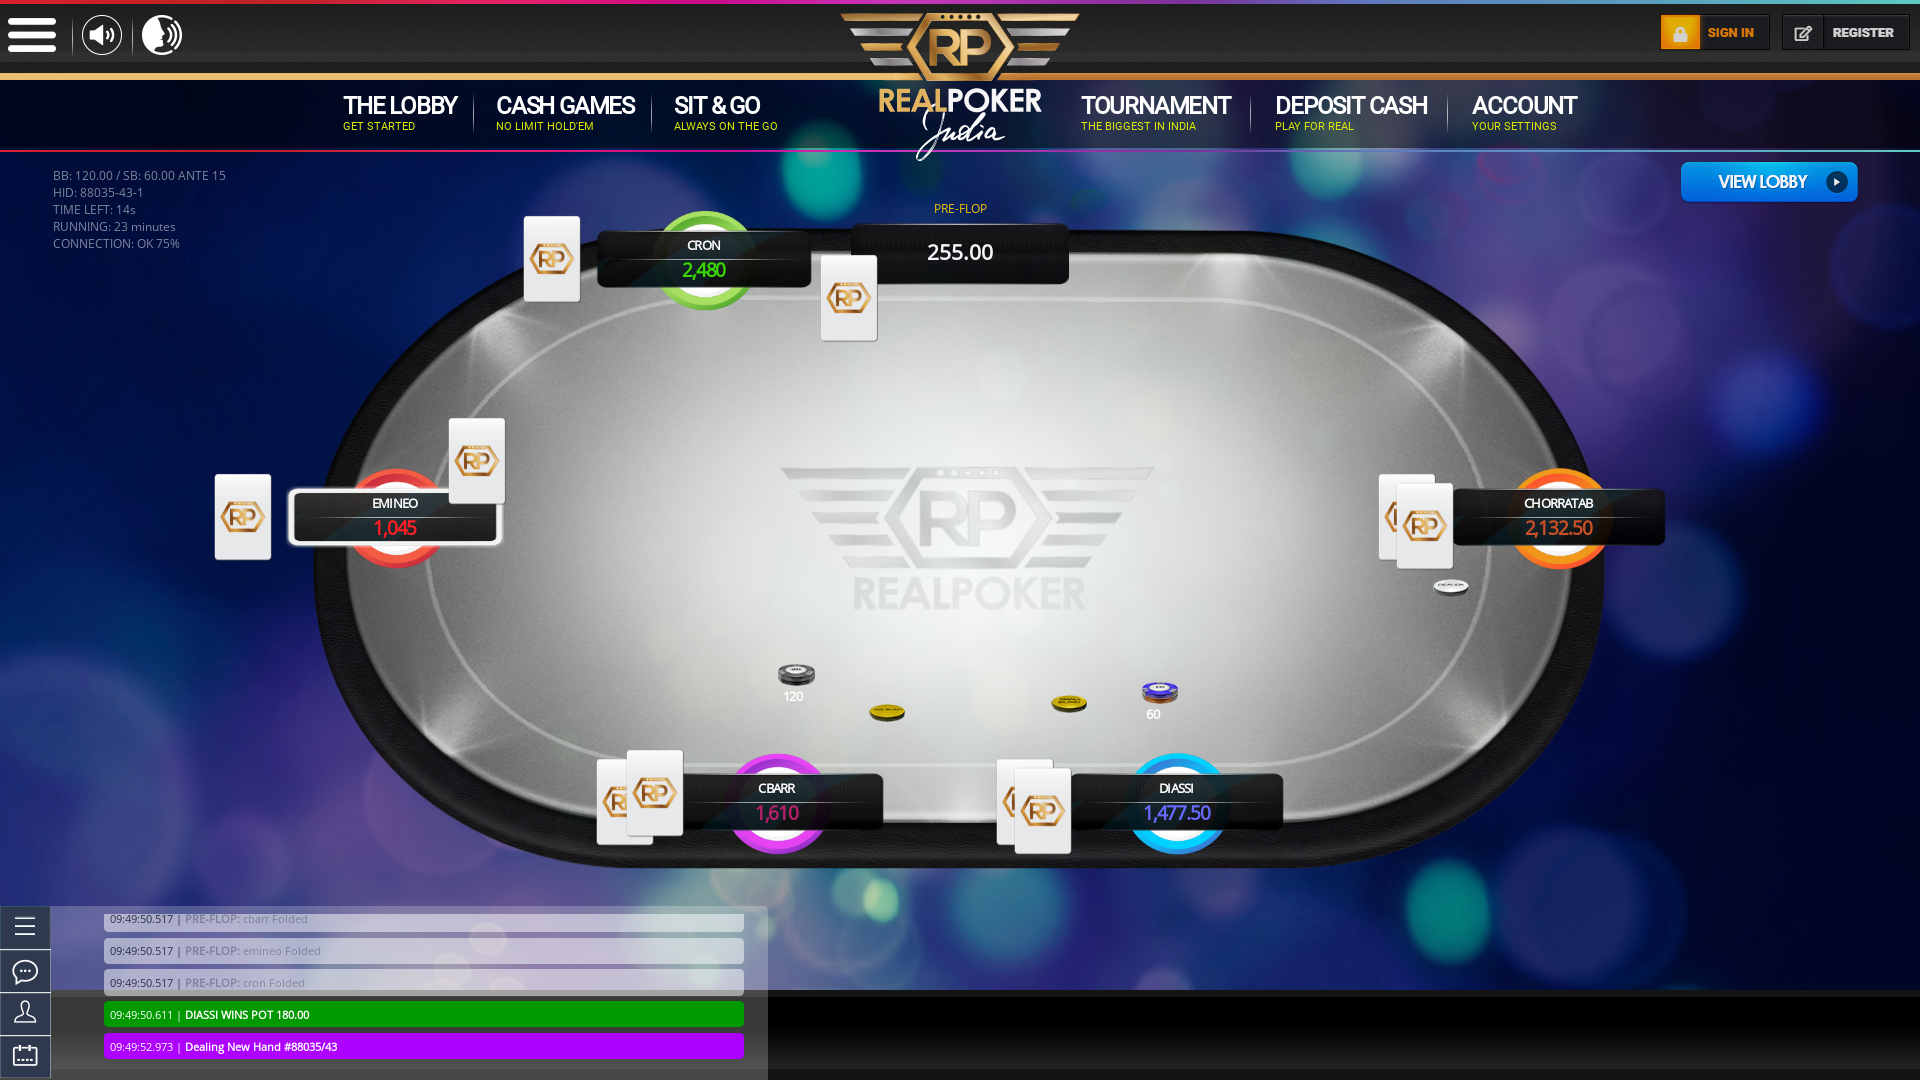 Real poker 6 player table in the 23rd minute of the match